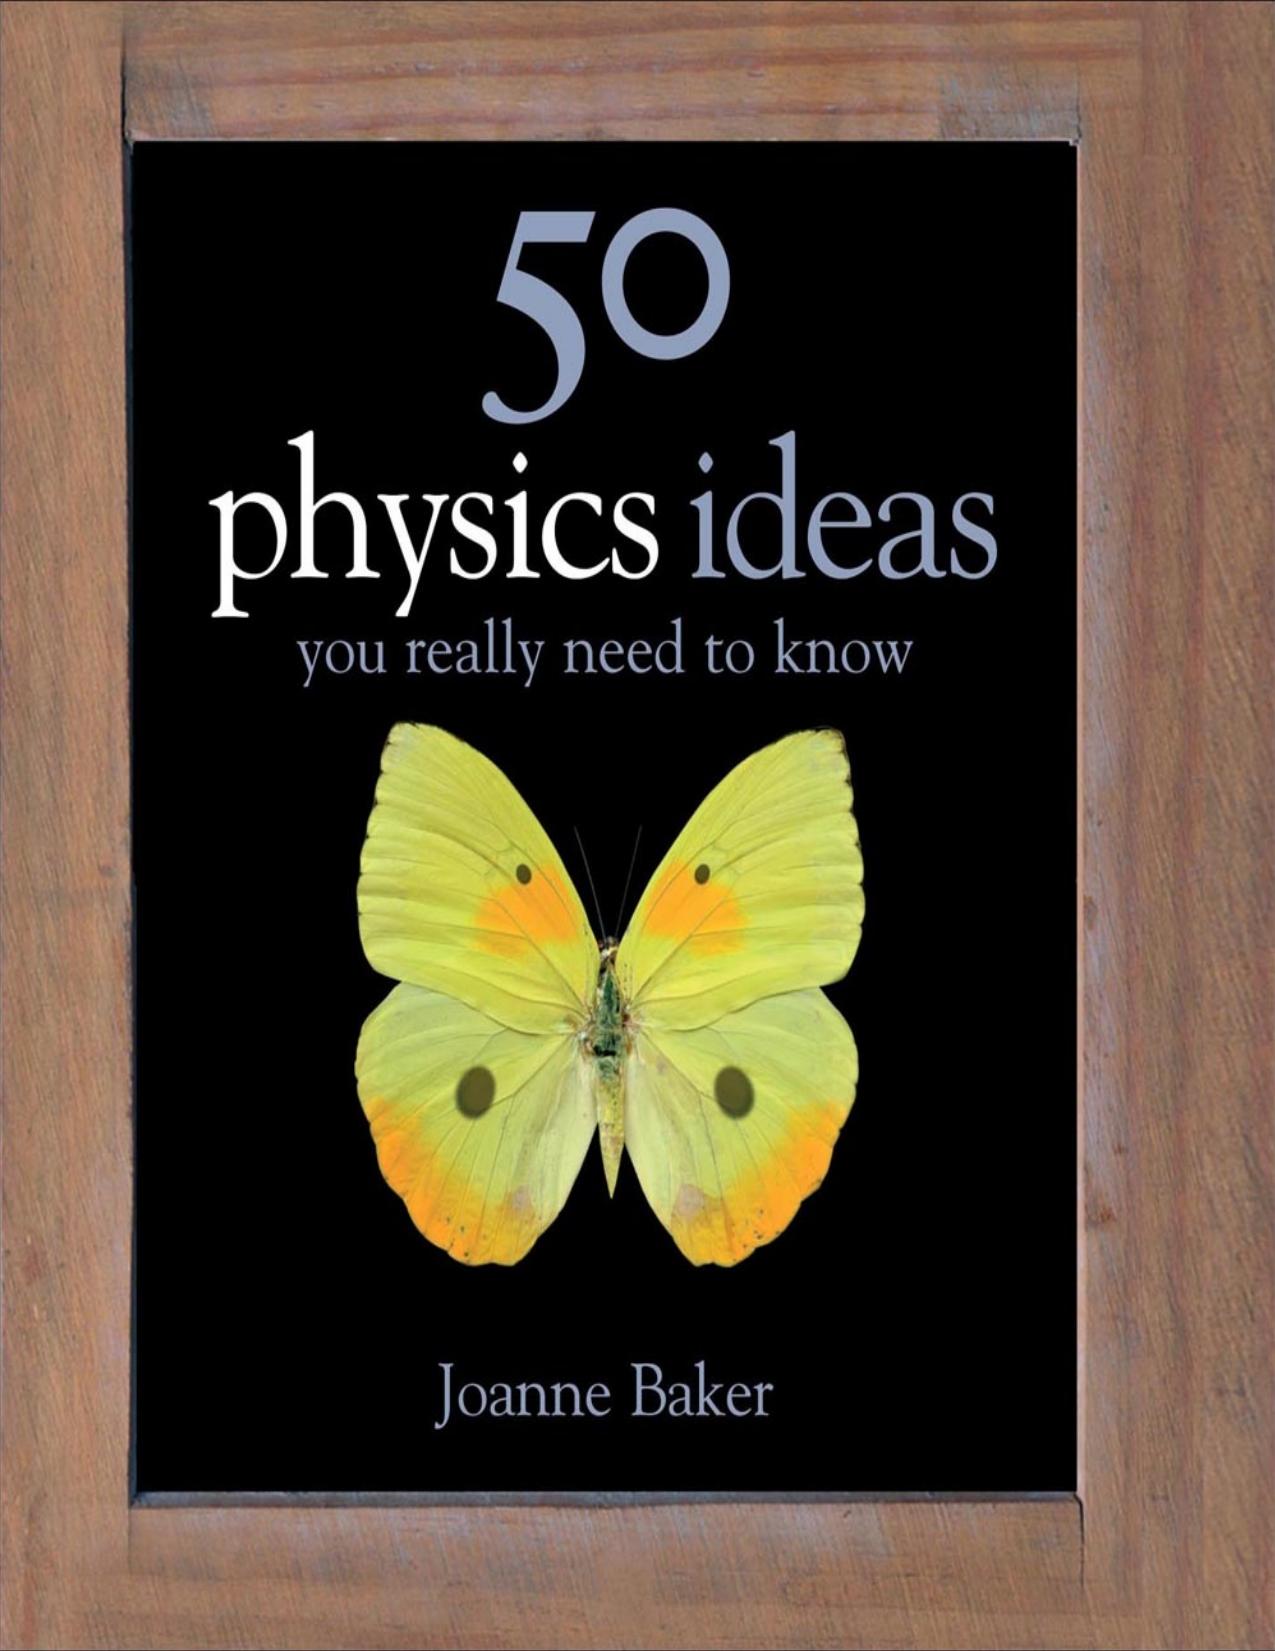 50 Physics Ideas You Really Need to Know - Joanne Baker.jpg